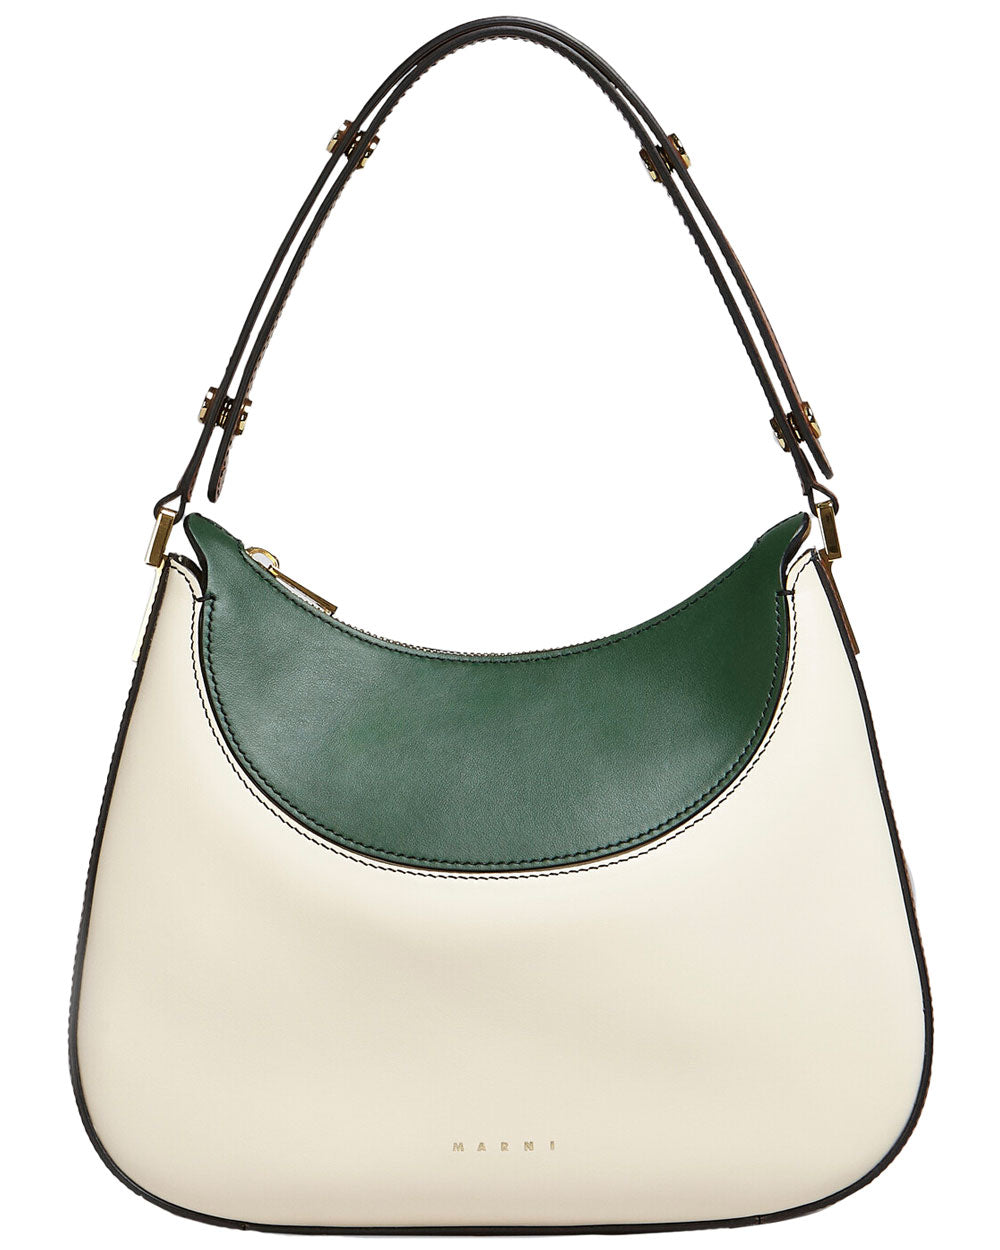 Milano Small Hobo Bag in White Brown and Green